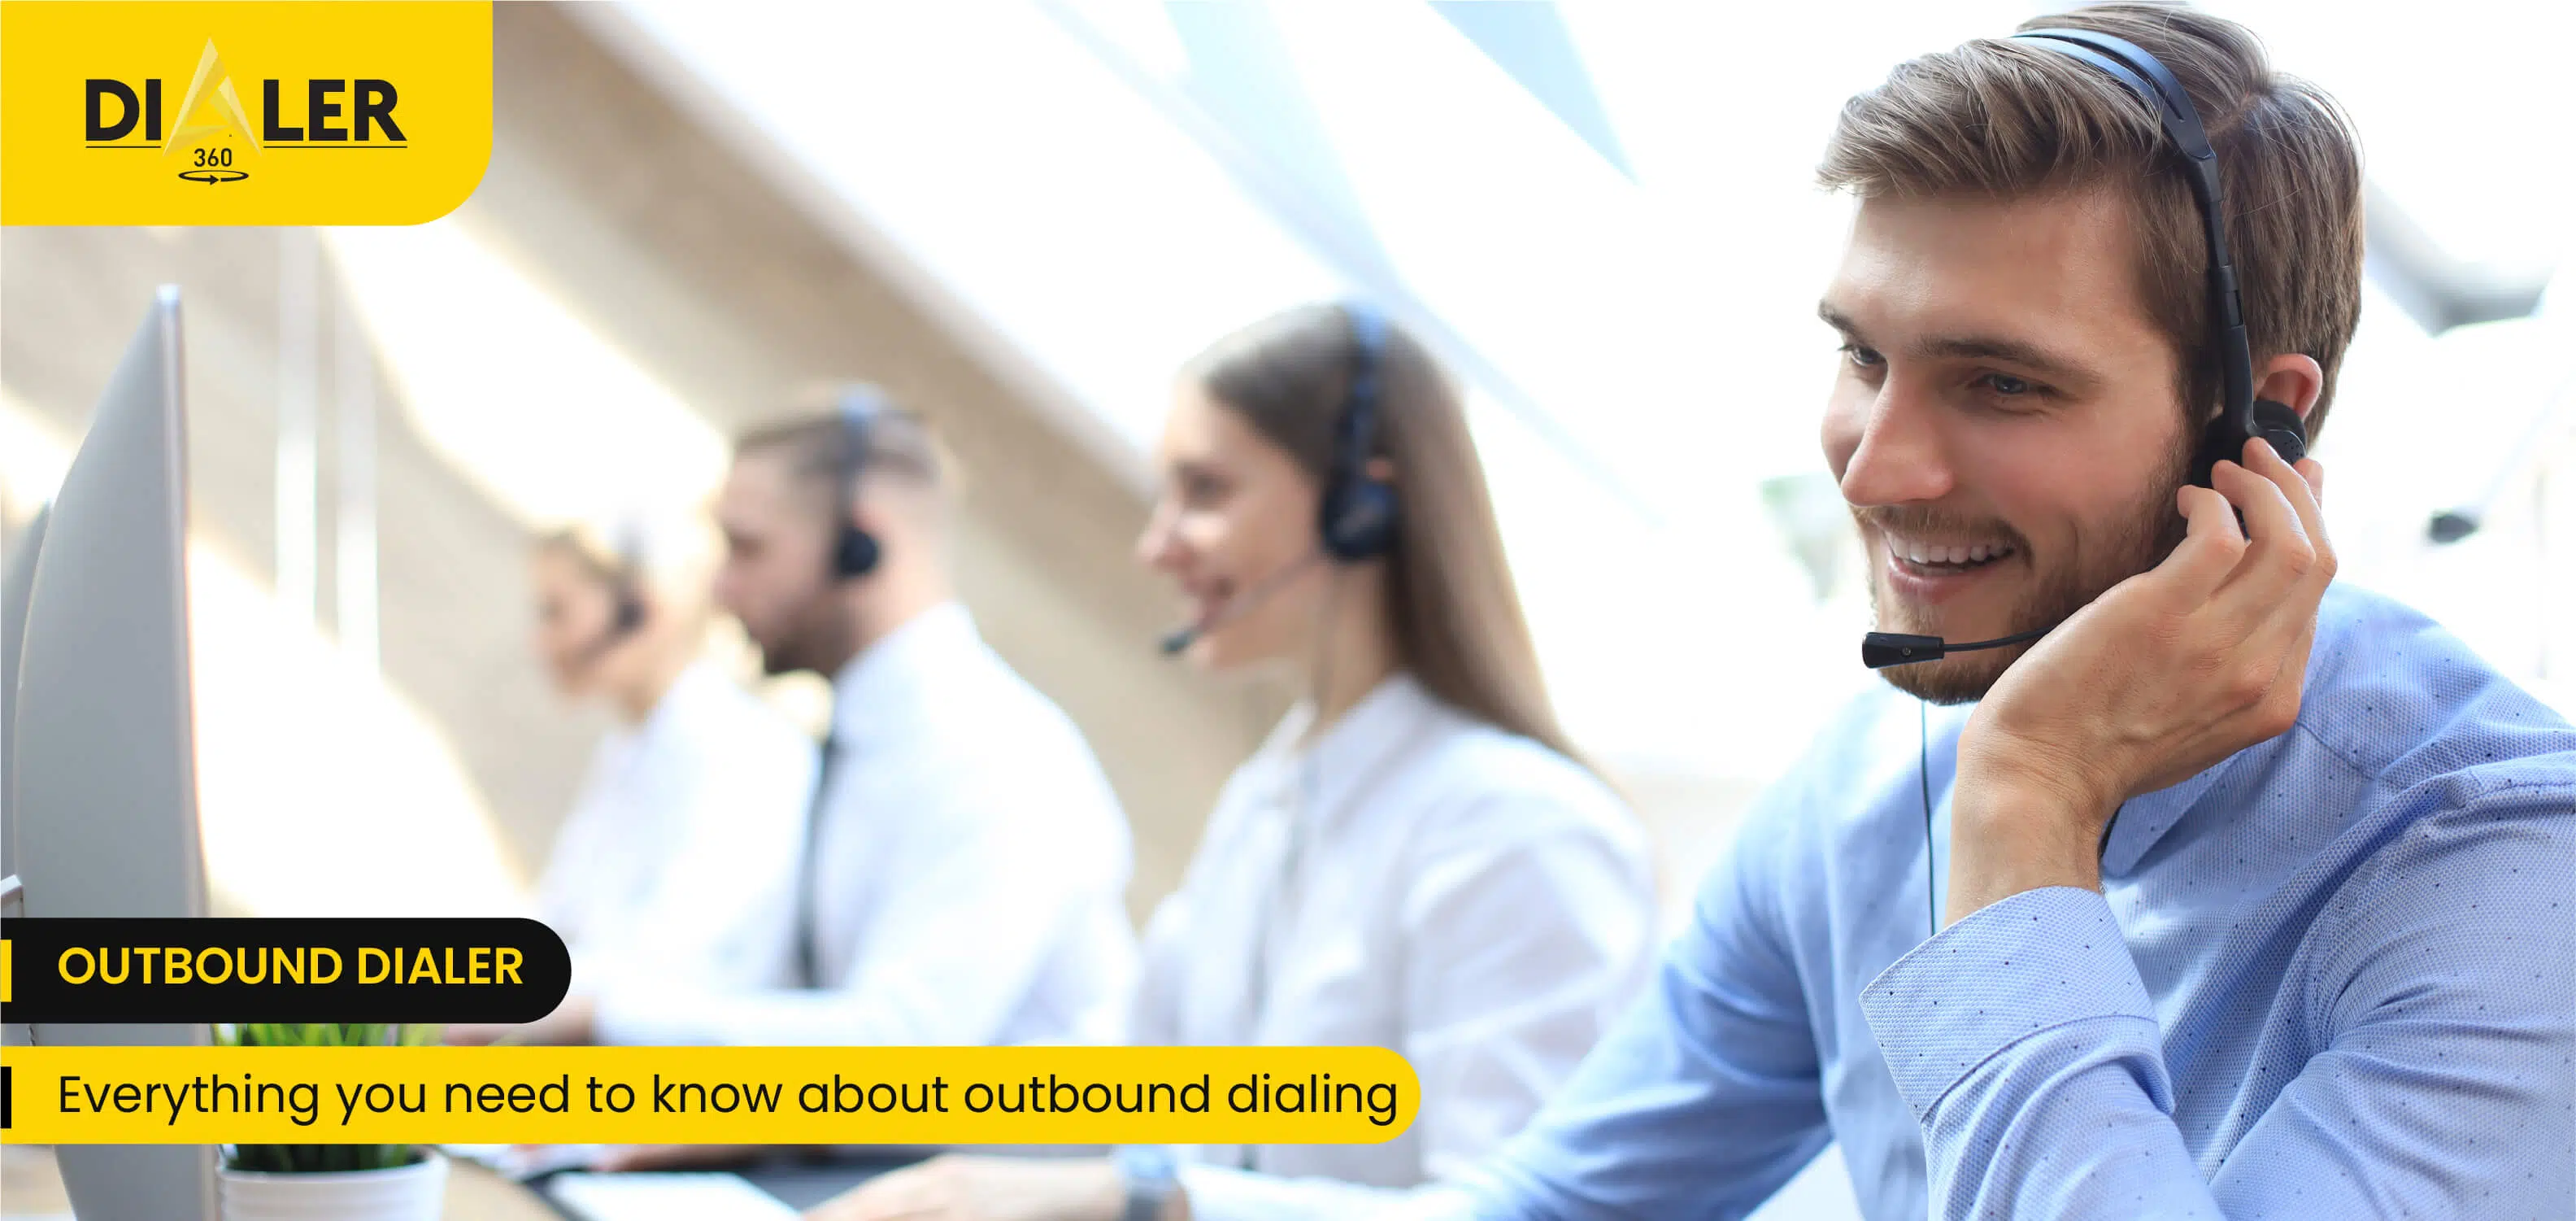 Outbound dialer: Everything you need to know about outbound dialing